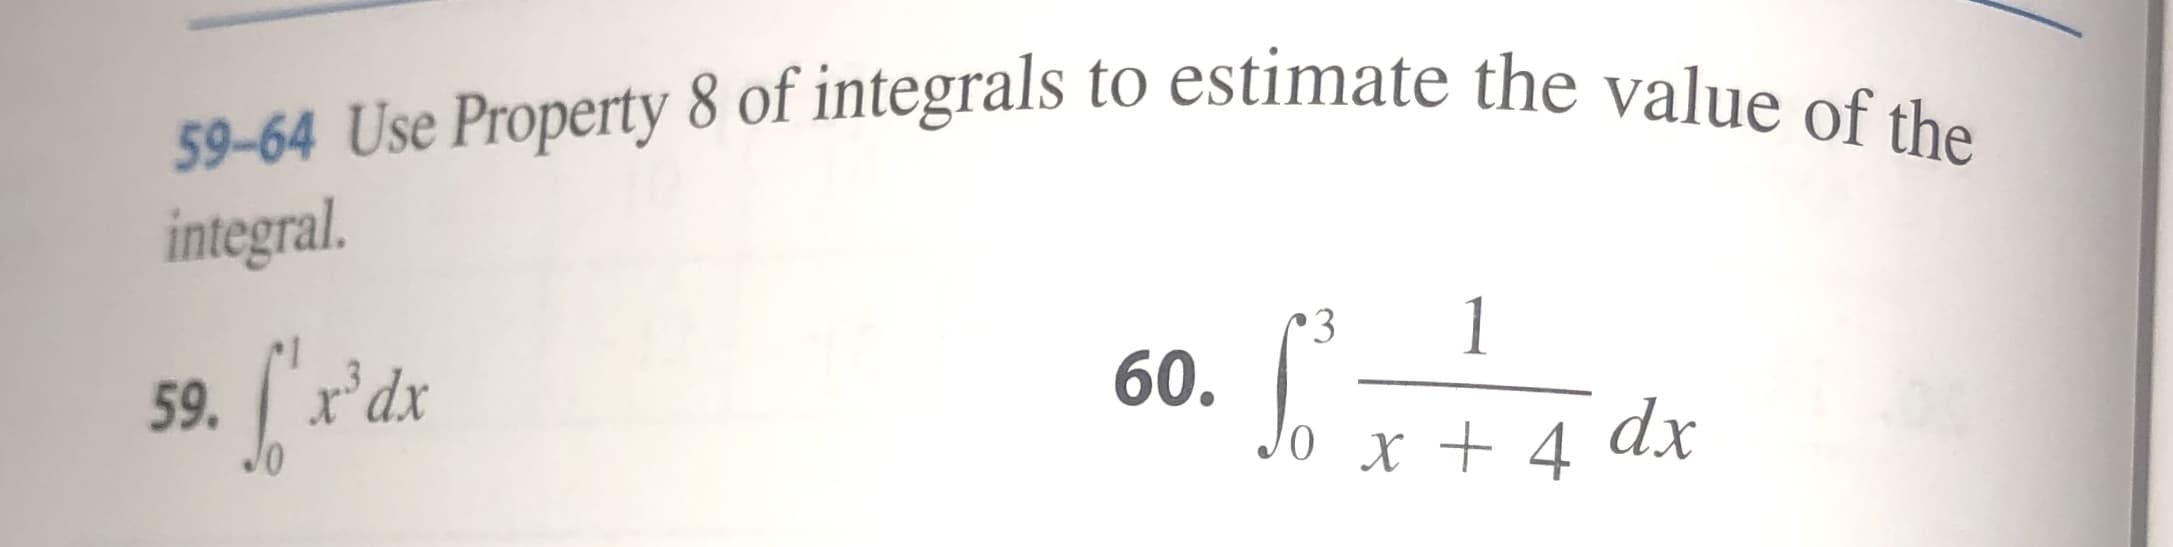 59-64 Use Property 8 of integrals to estimate the value of the
integral
1
3
60.
Jo x+ 4
59.r'dx
dx
0
